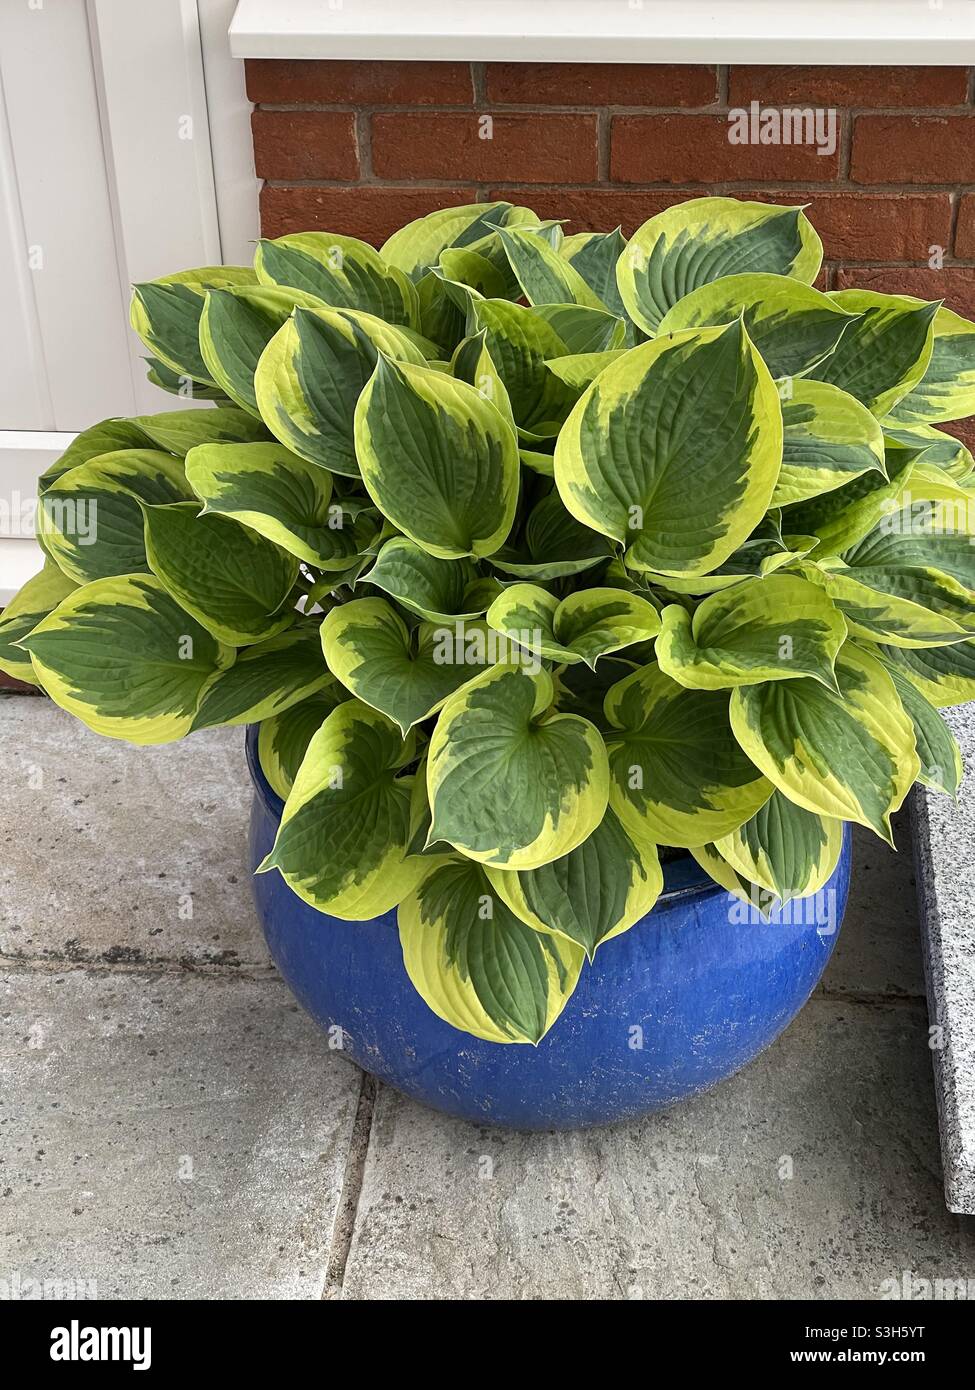 Variegated hosta in a blue glazed plant pot container Stock Photo